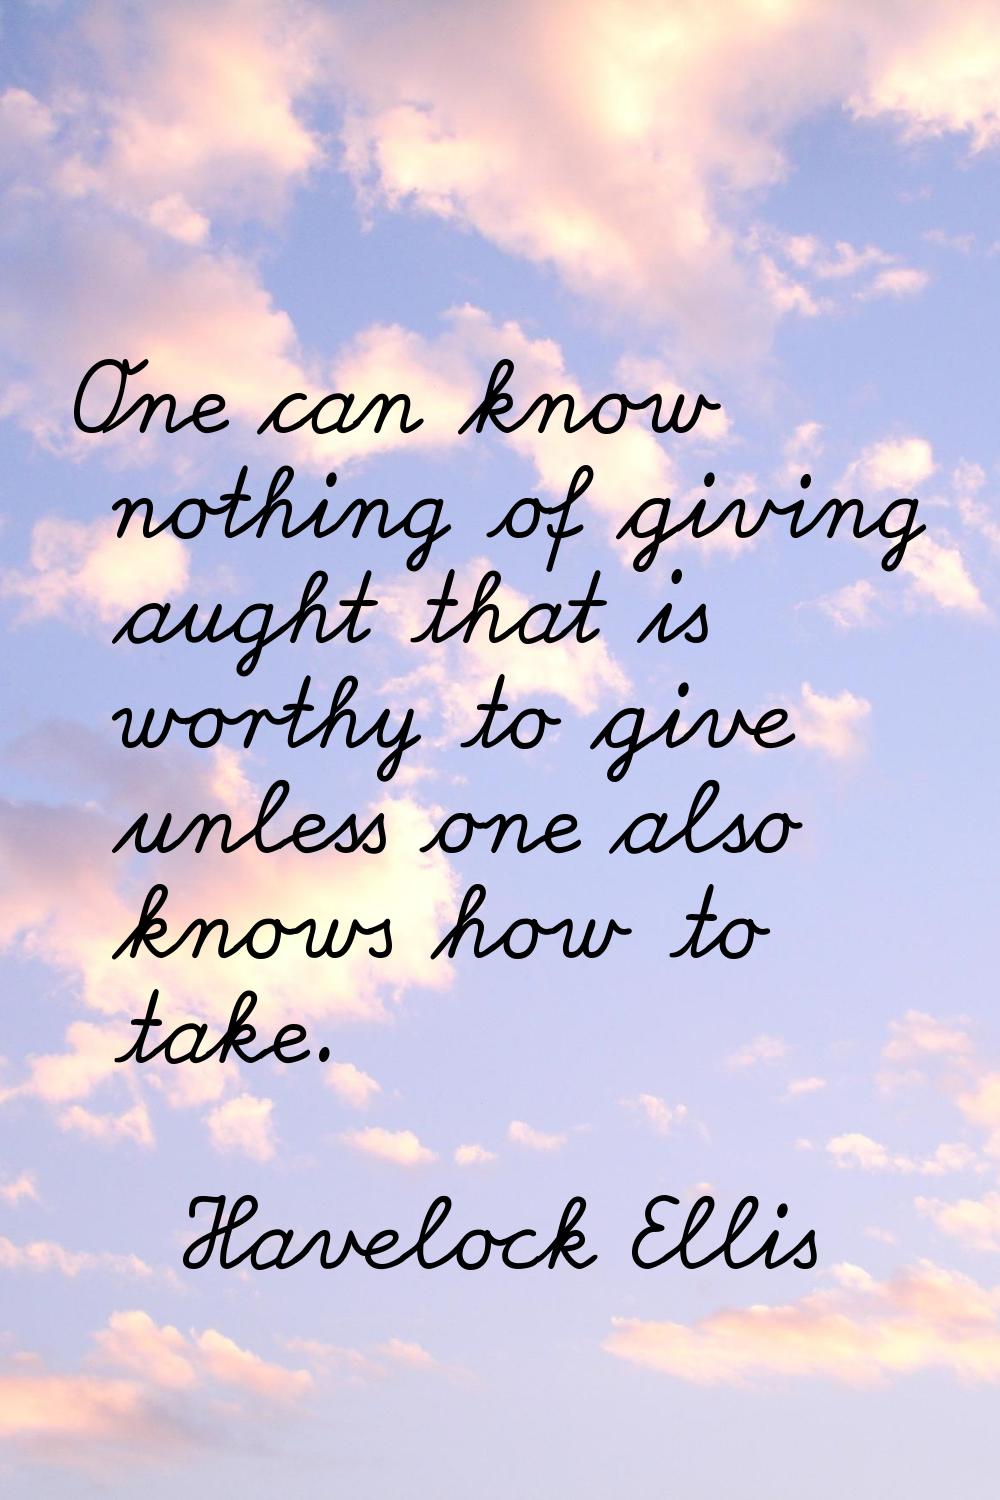 One can know nothing of giving aught that is worthy to give unless one also knows how to take.